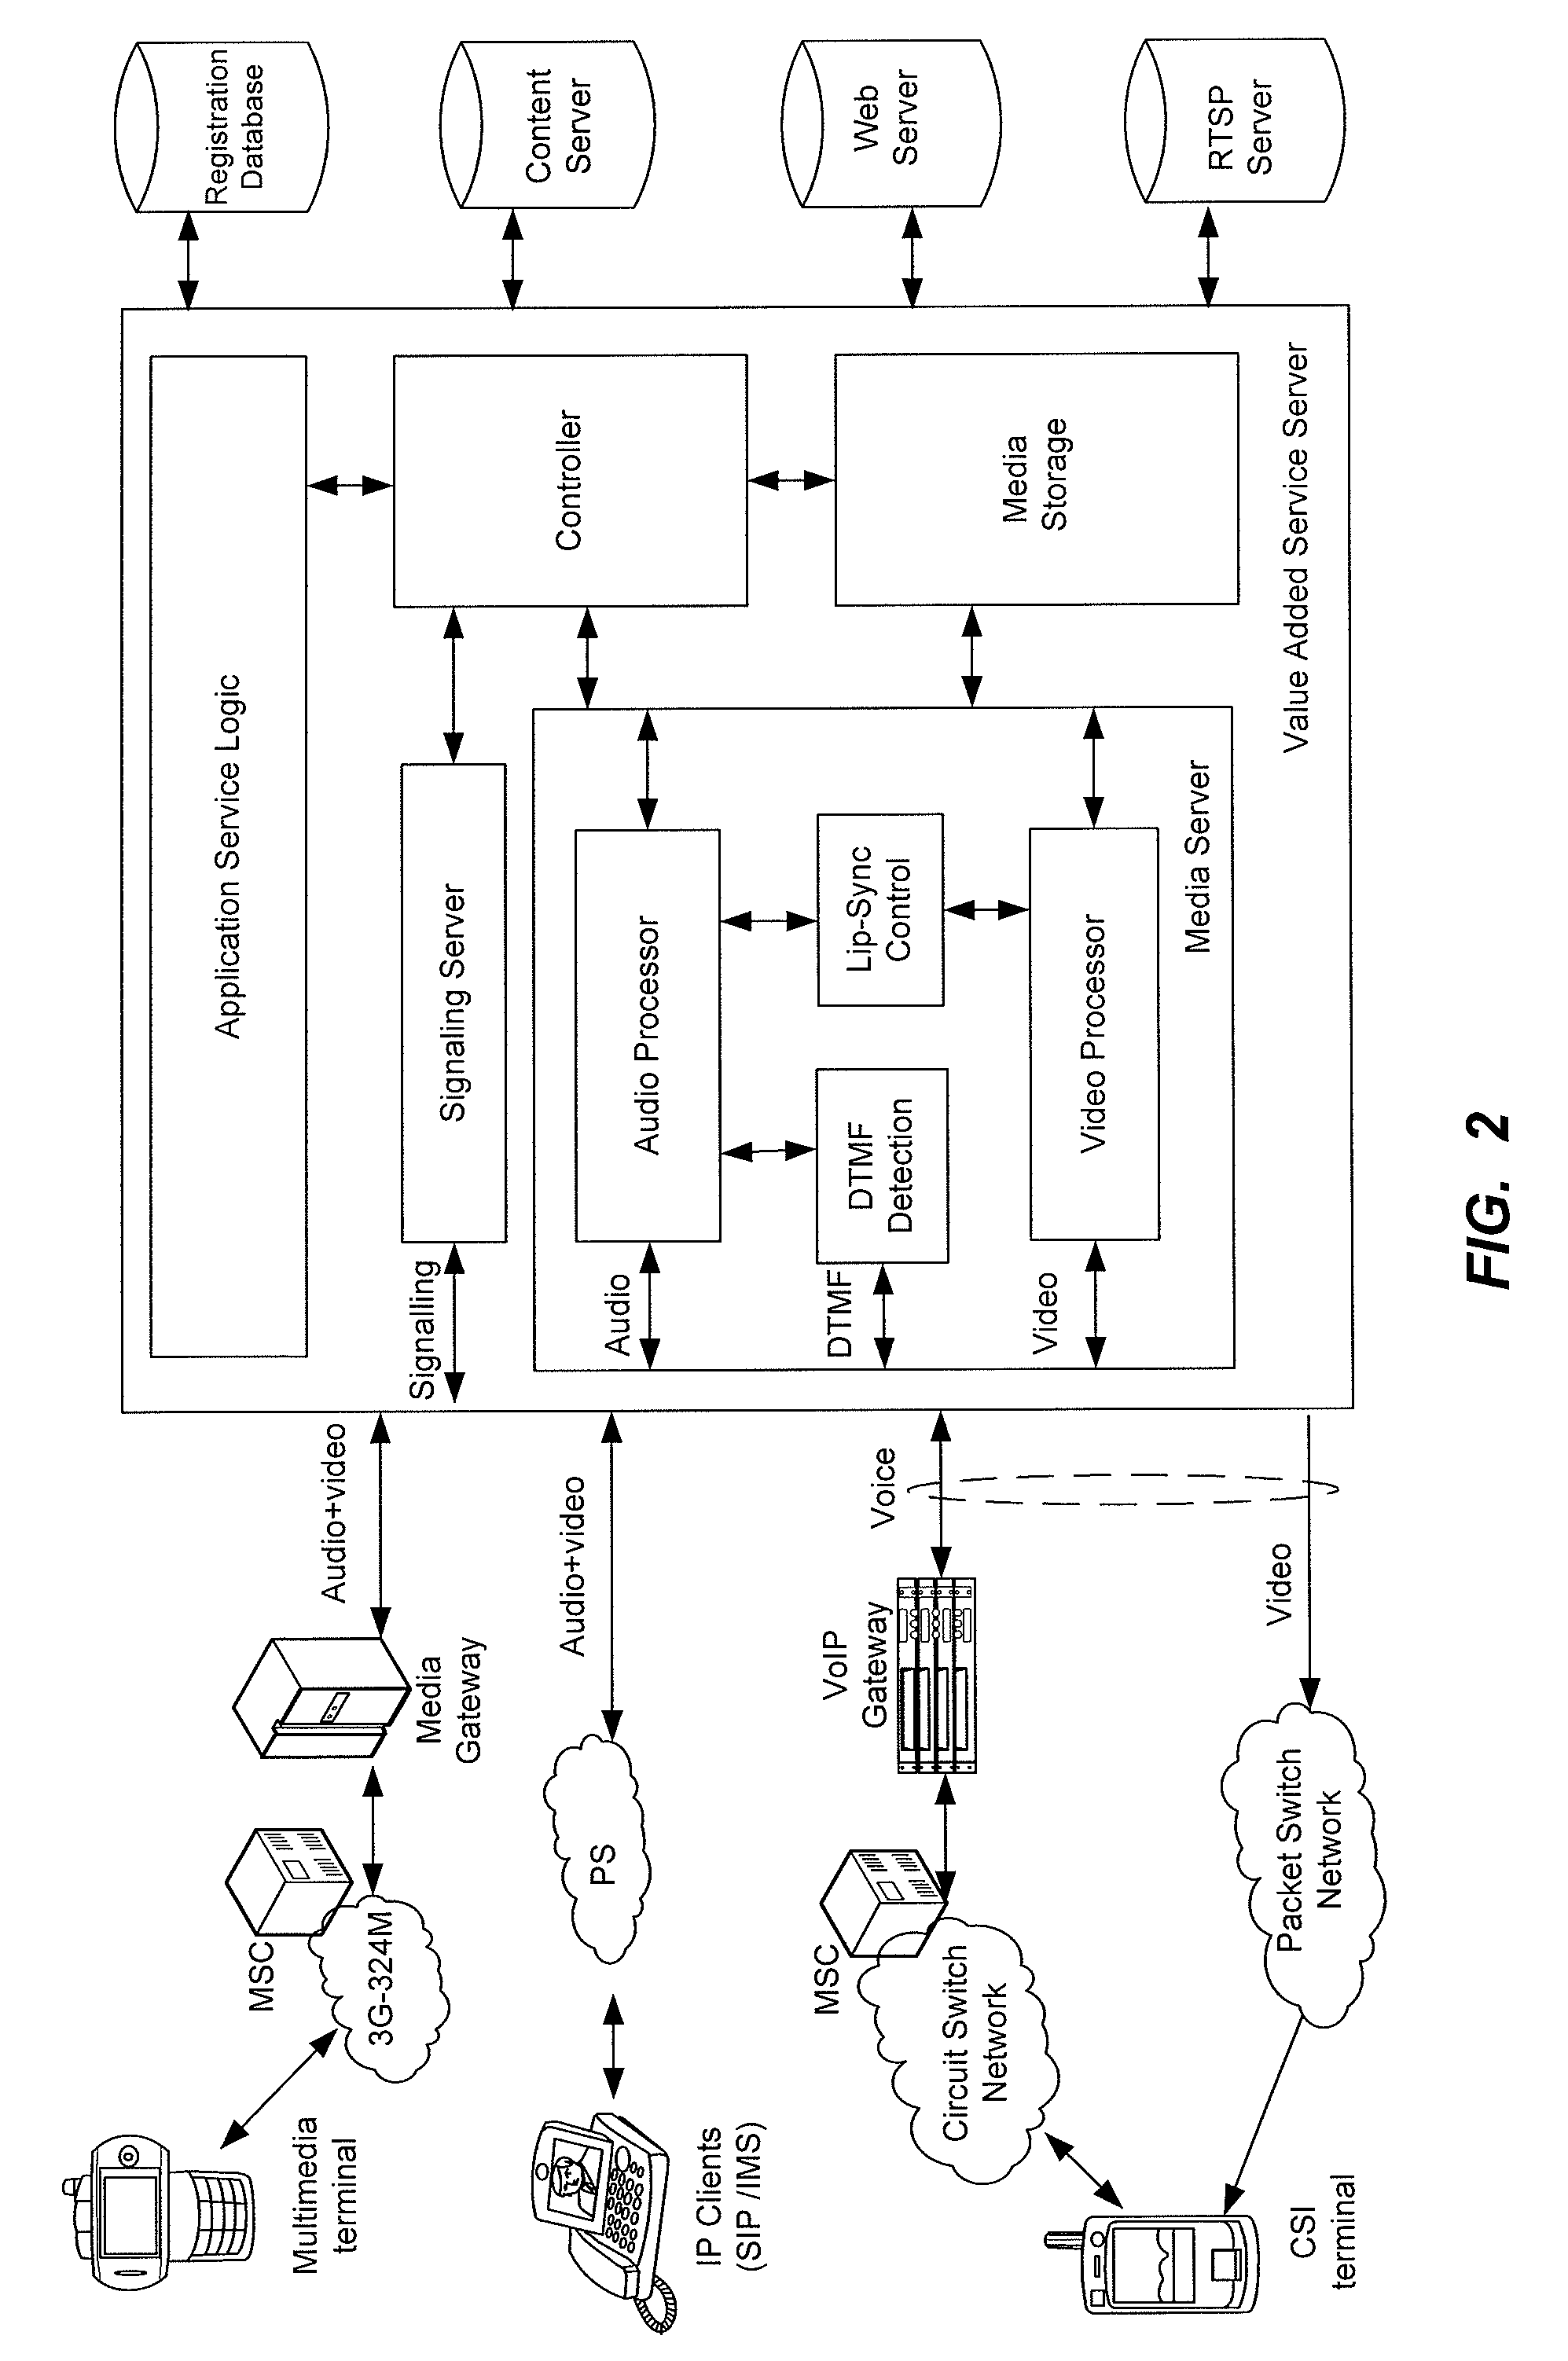 Method and apparatus for video services